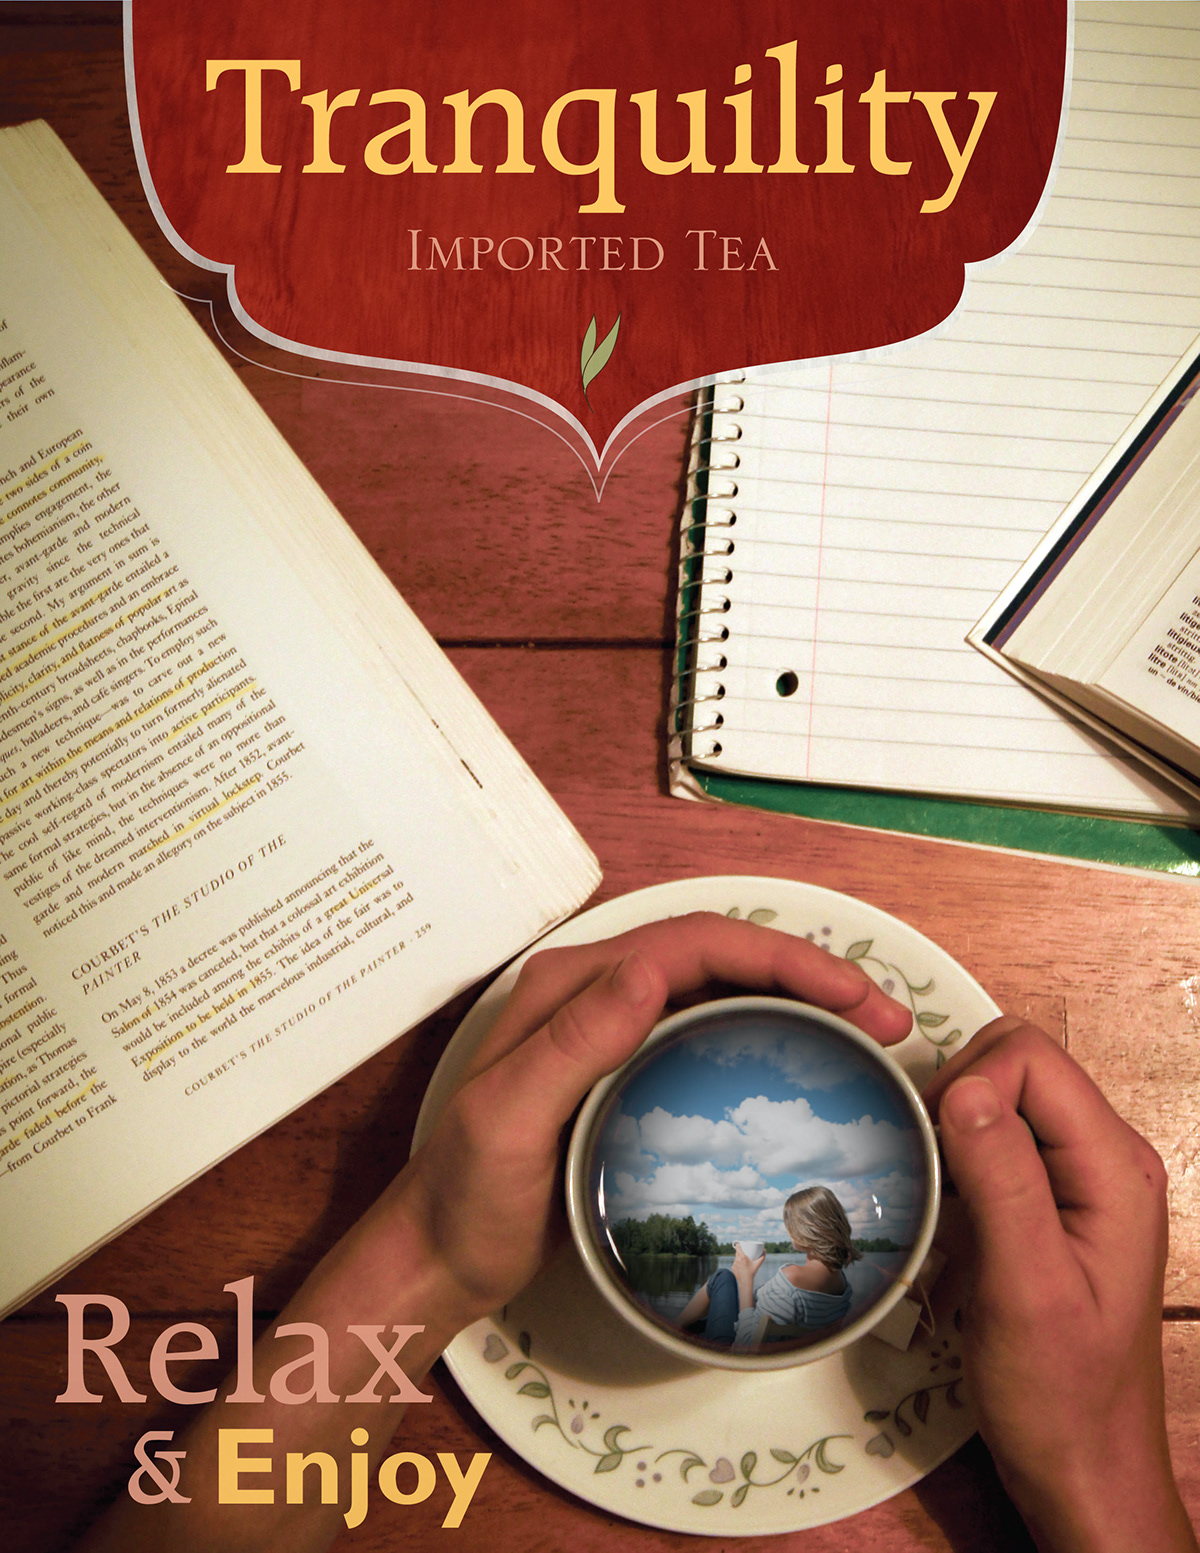 tea tranquility relax enjoy ad visual concept advertisement